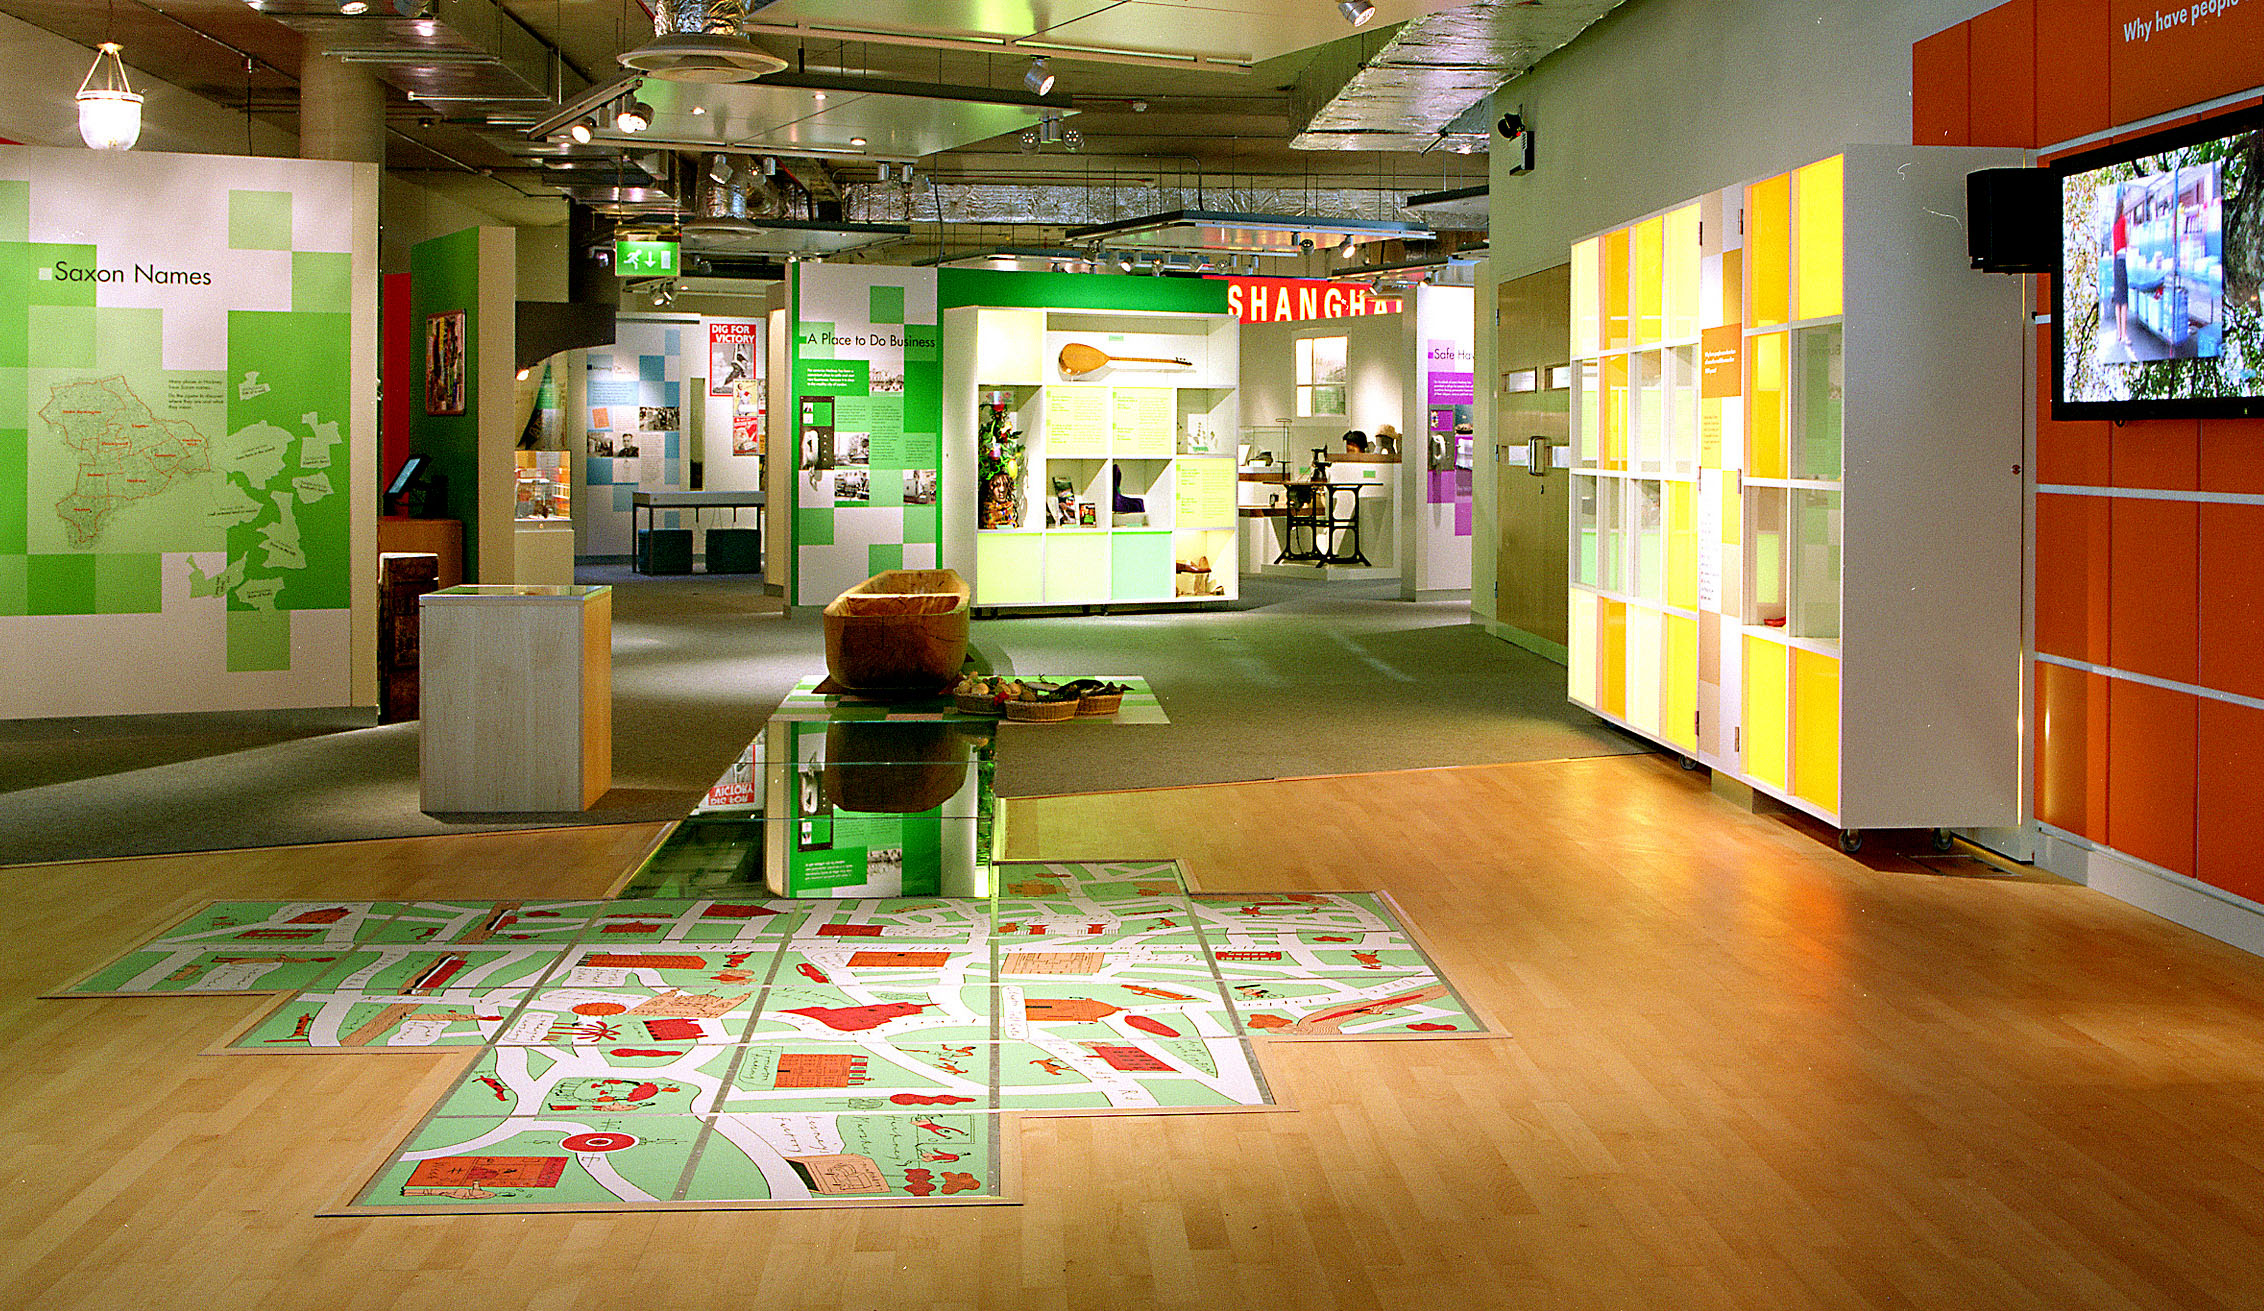 Image of the inside of Hackney Museum.